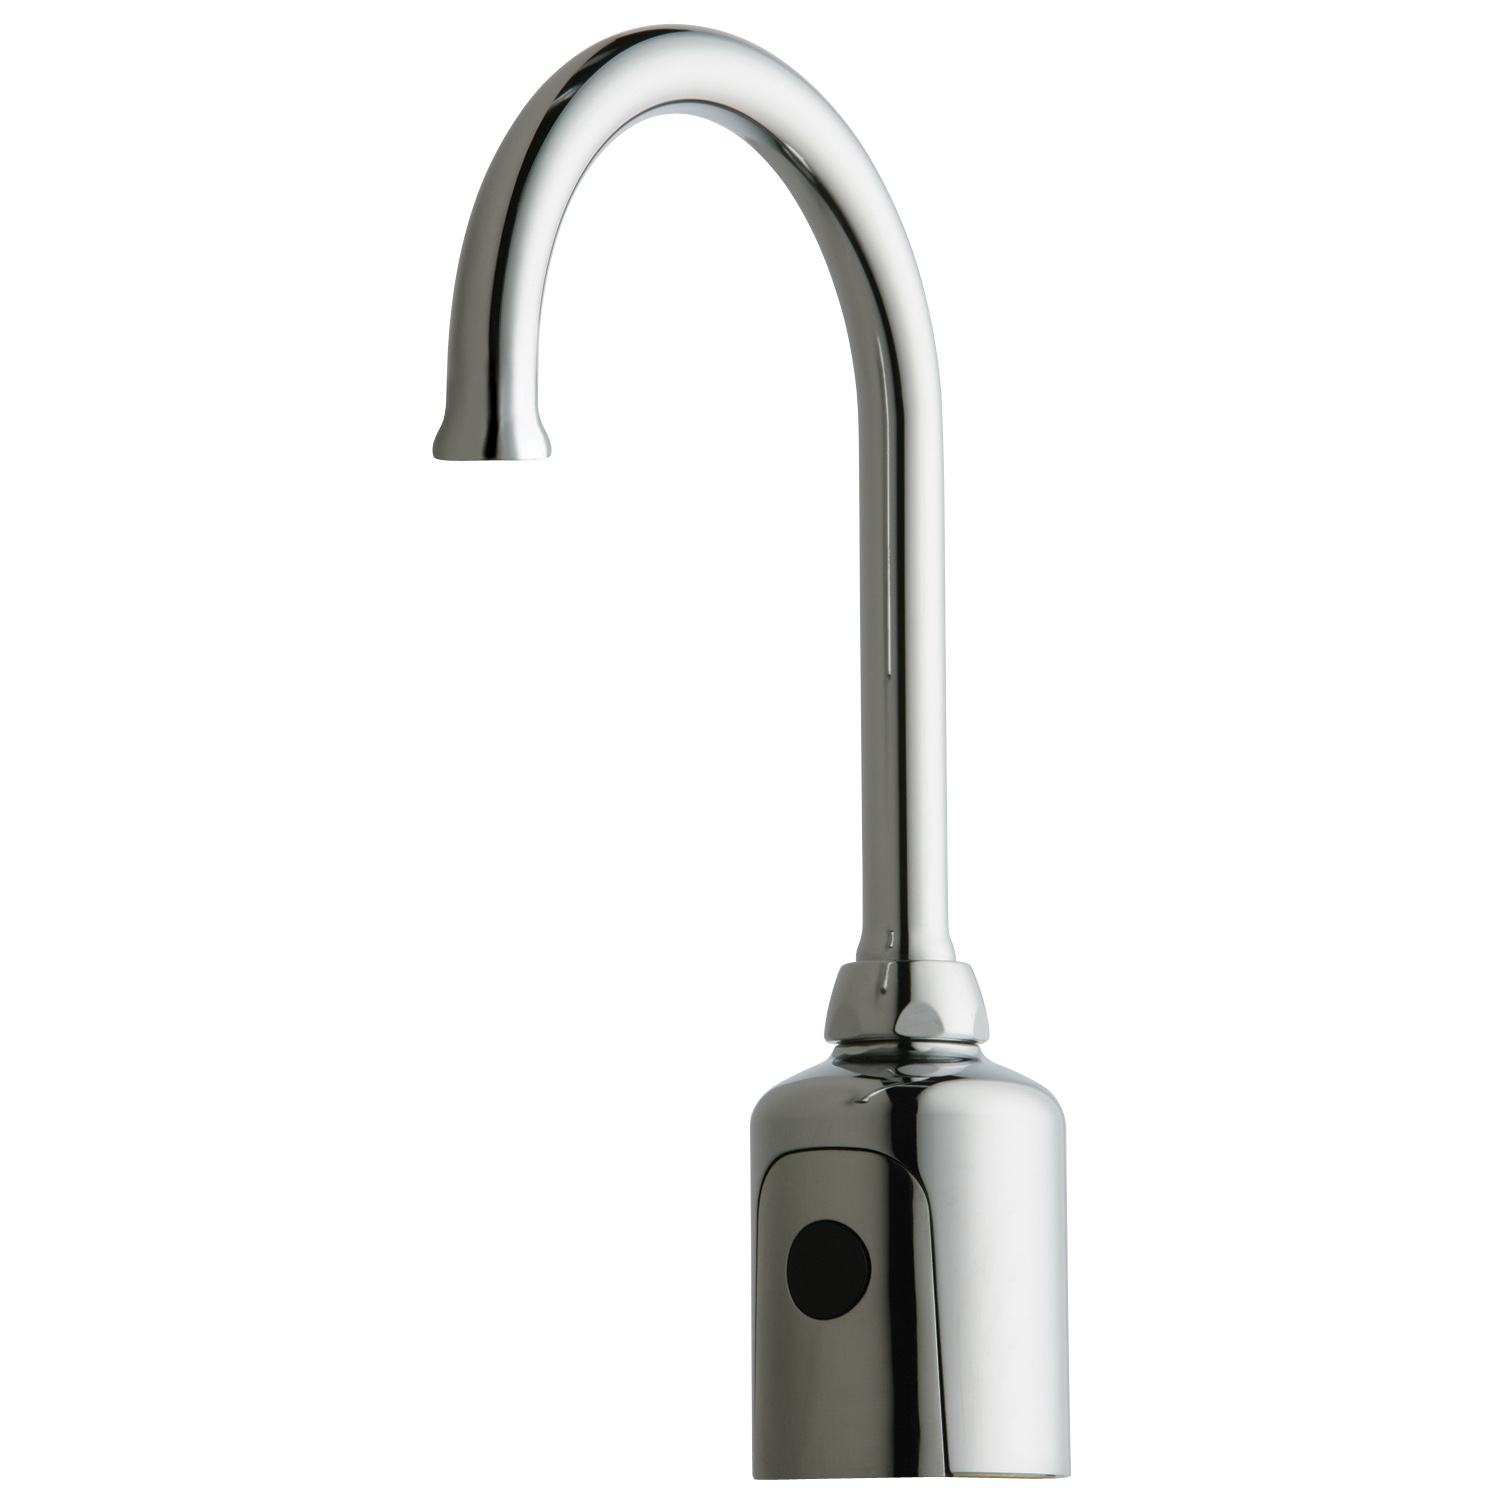 HyTronic Sink Faucet In Chrome